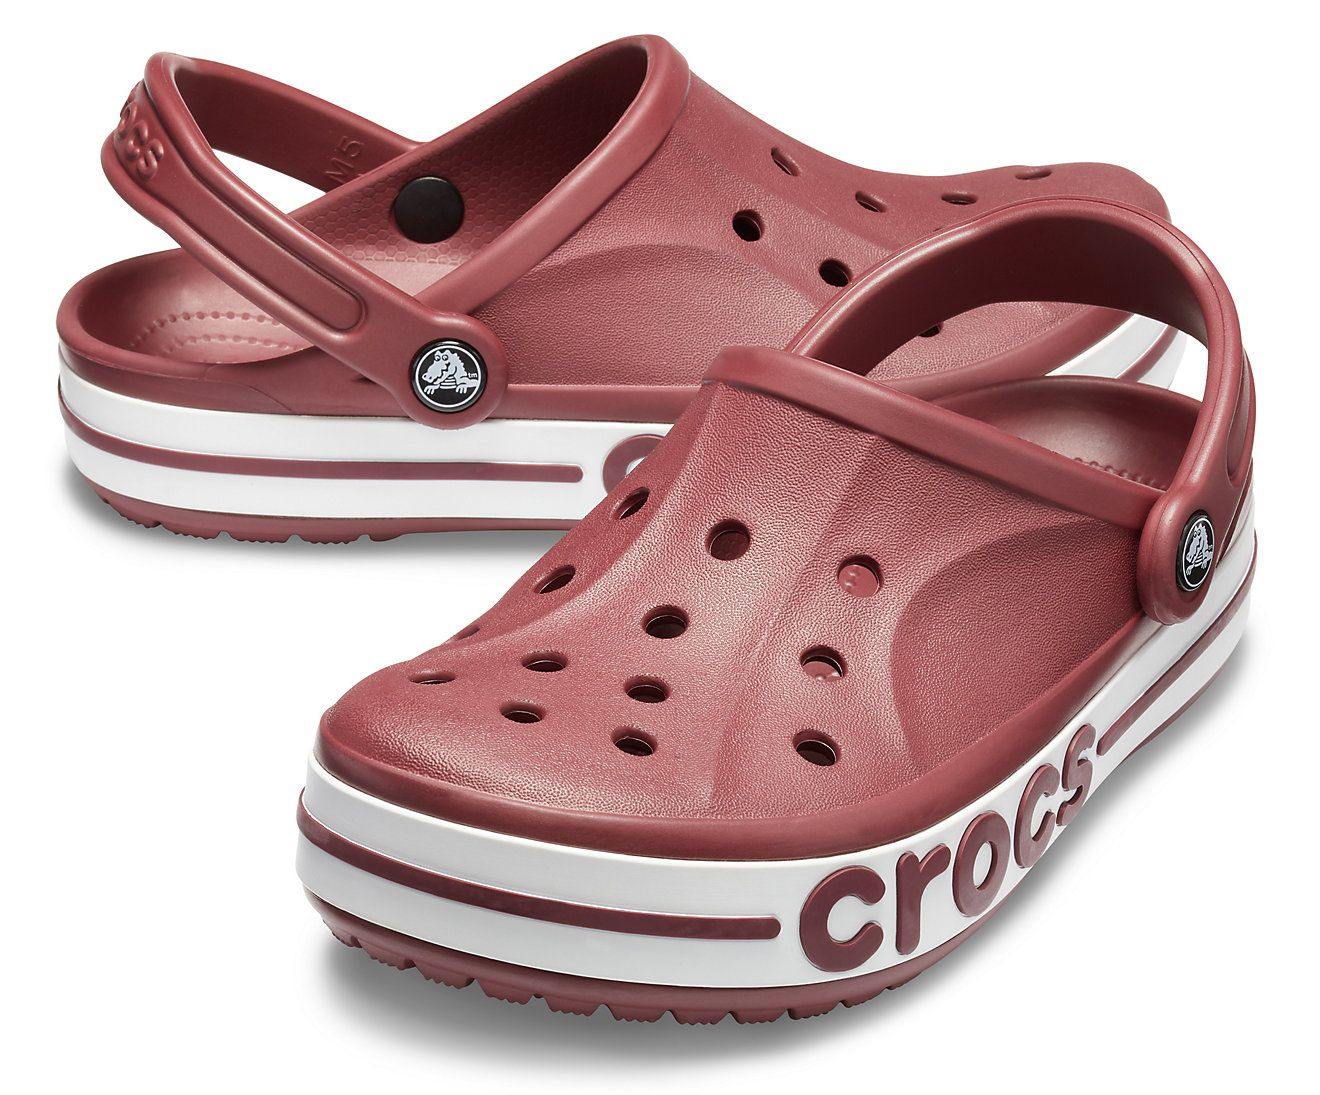 Authentic Crocs Bayaband Clog for Women - mTravel Store